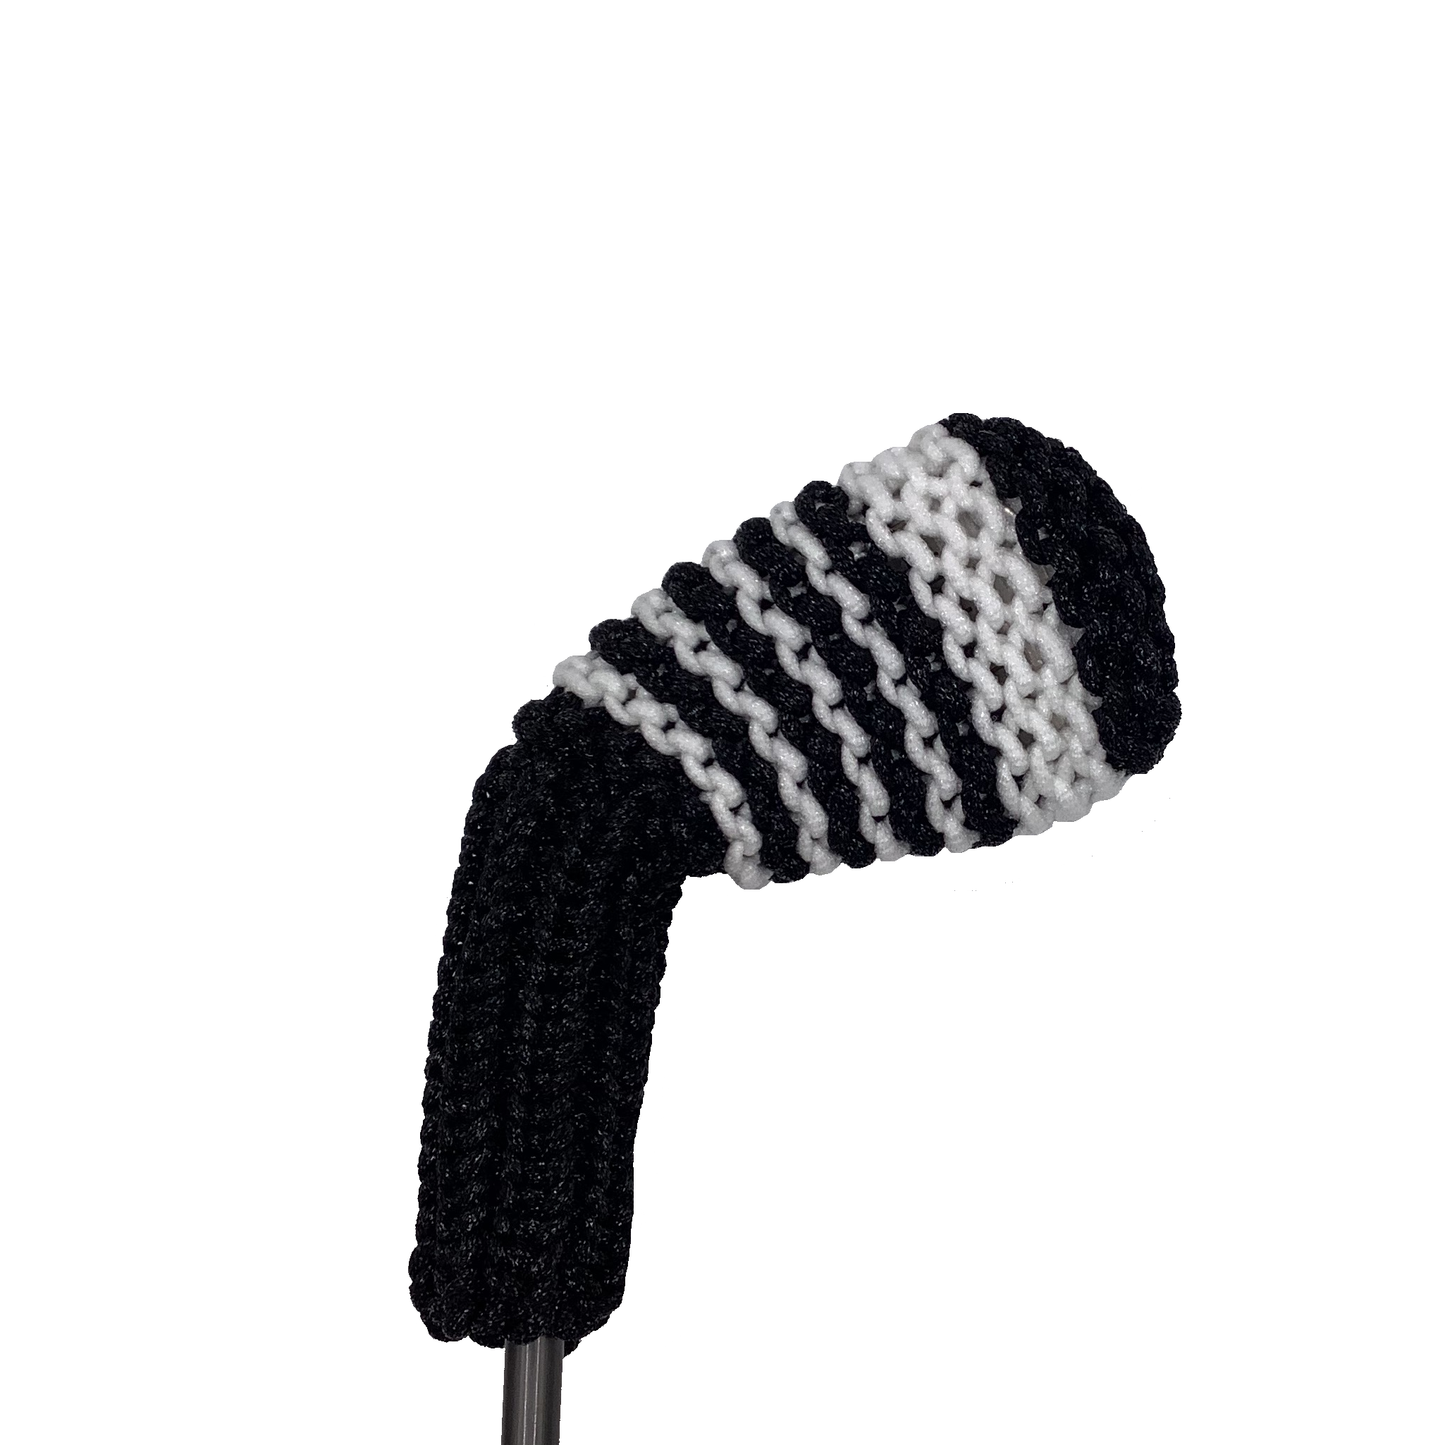 Clean Shot™ iron golf club headcover in black with white stripes to represent a 9 iron.